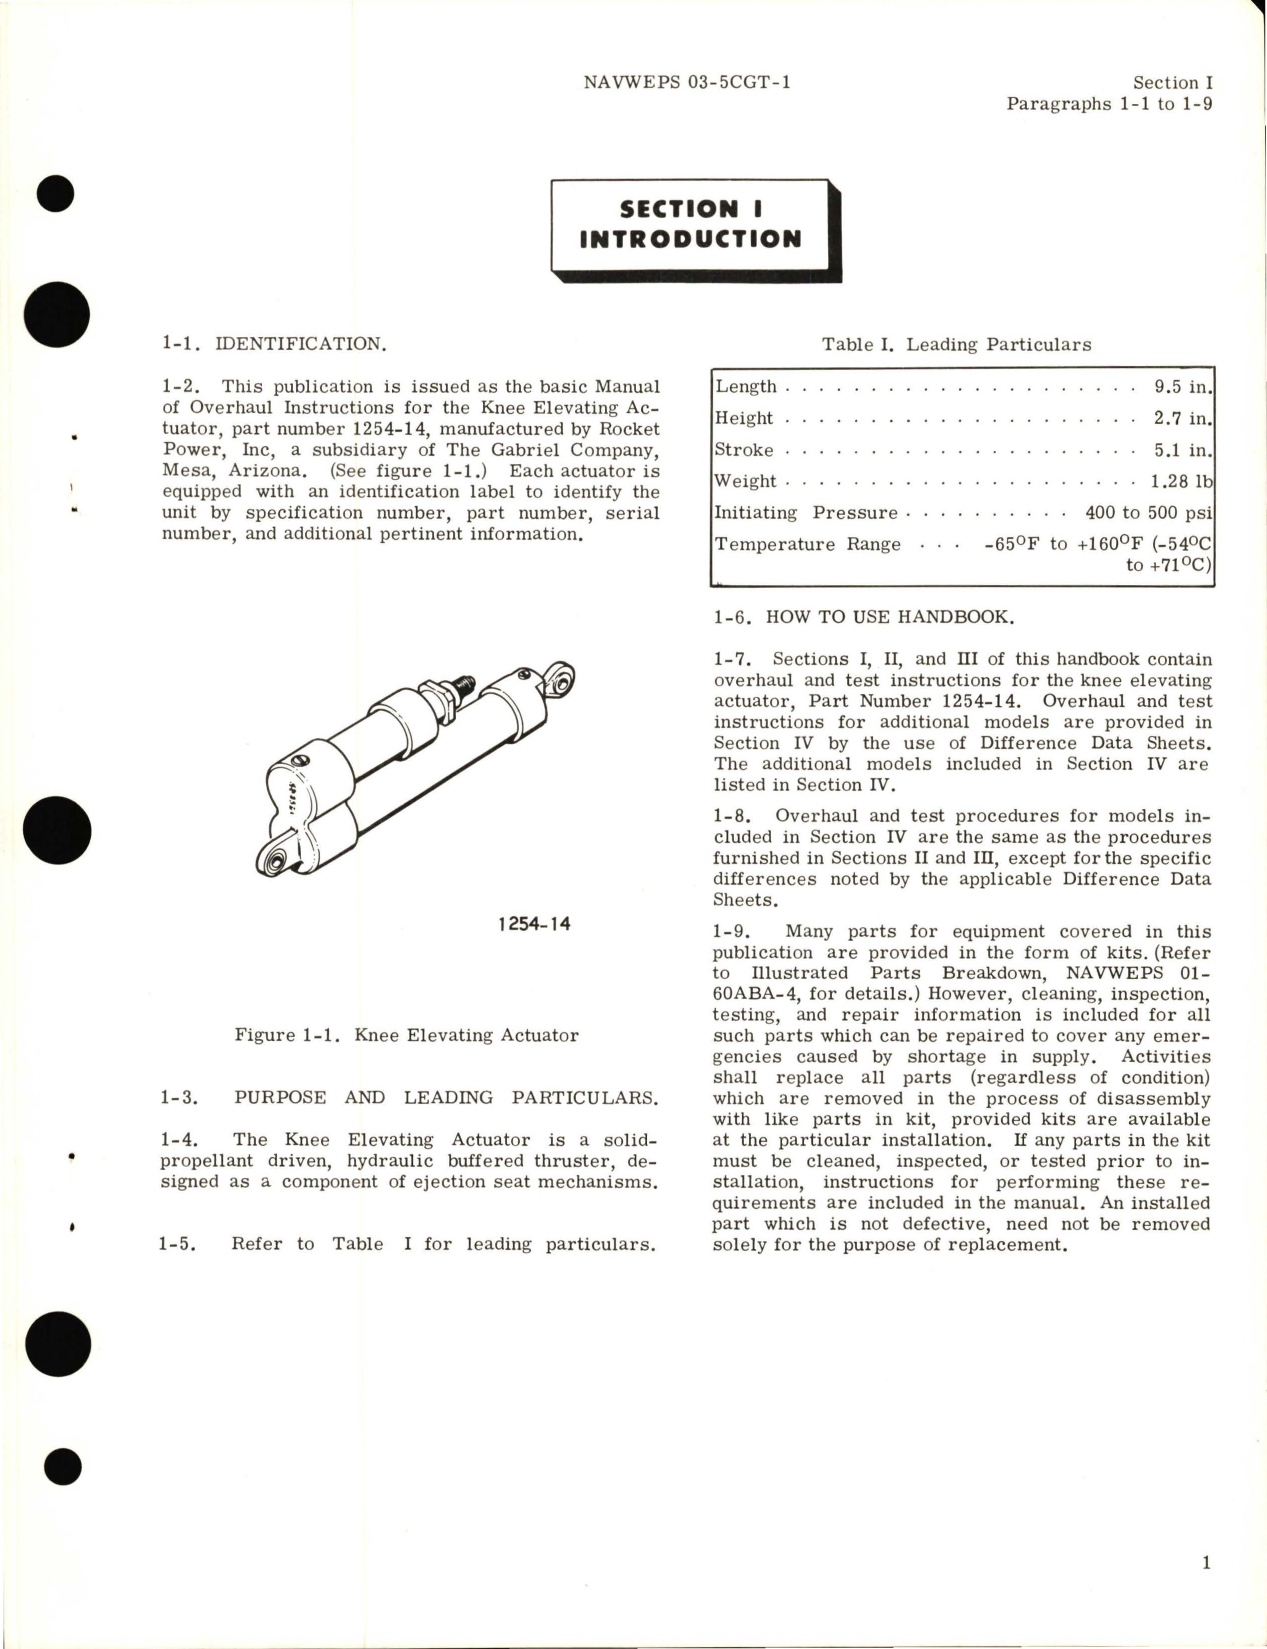 Sample page 5 from AirCorps Library document: Overhaul Instructions for Knee Elevating Actuator - Part 1254-14 